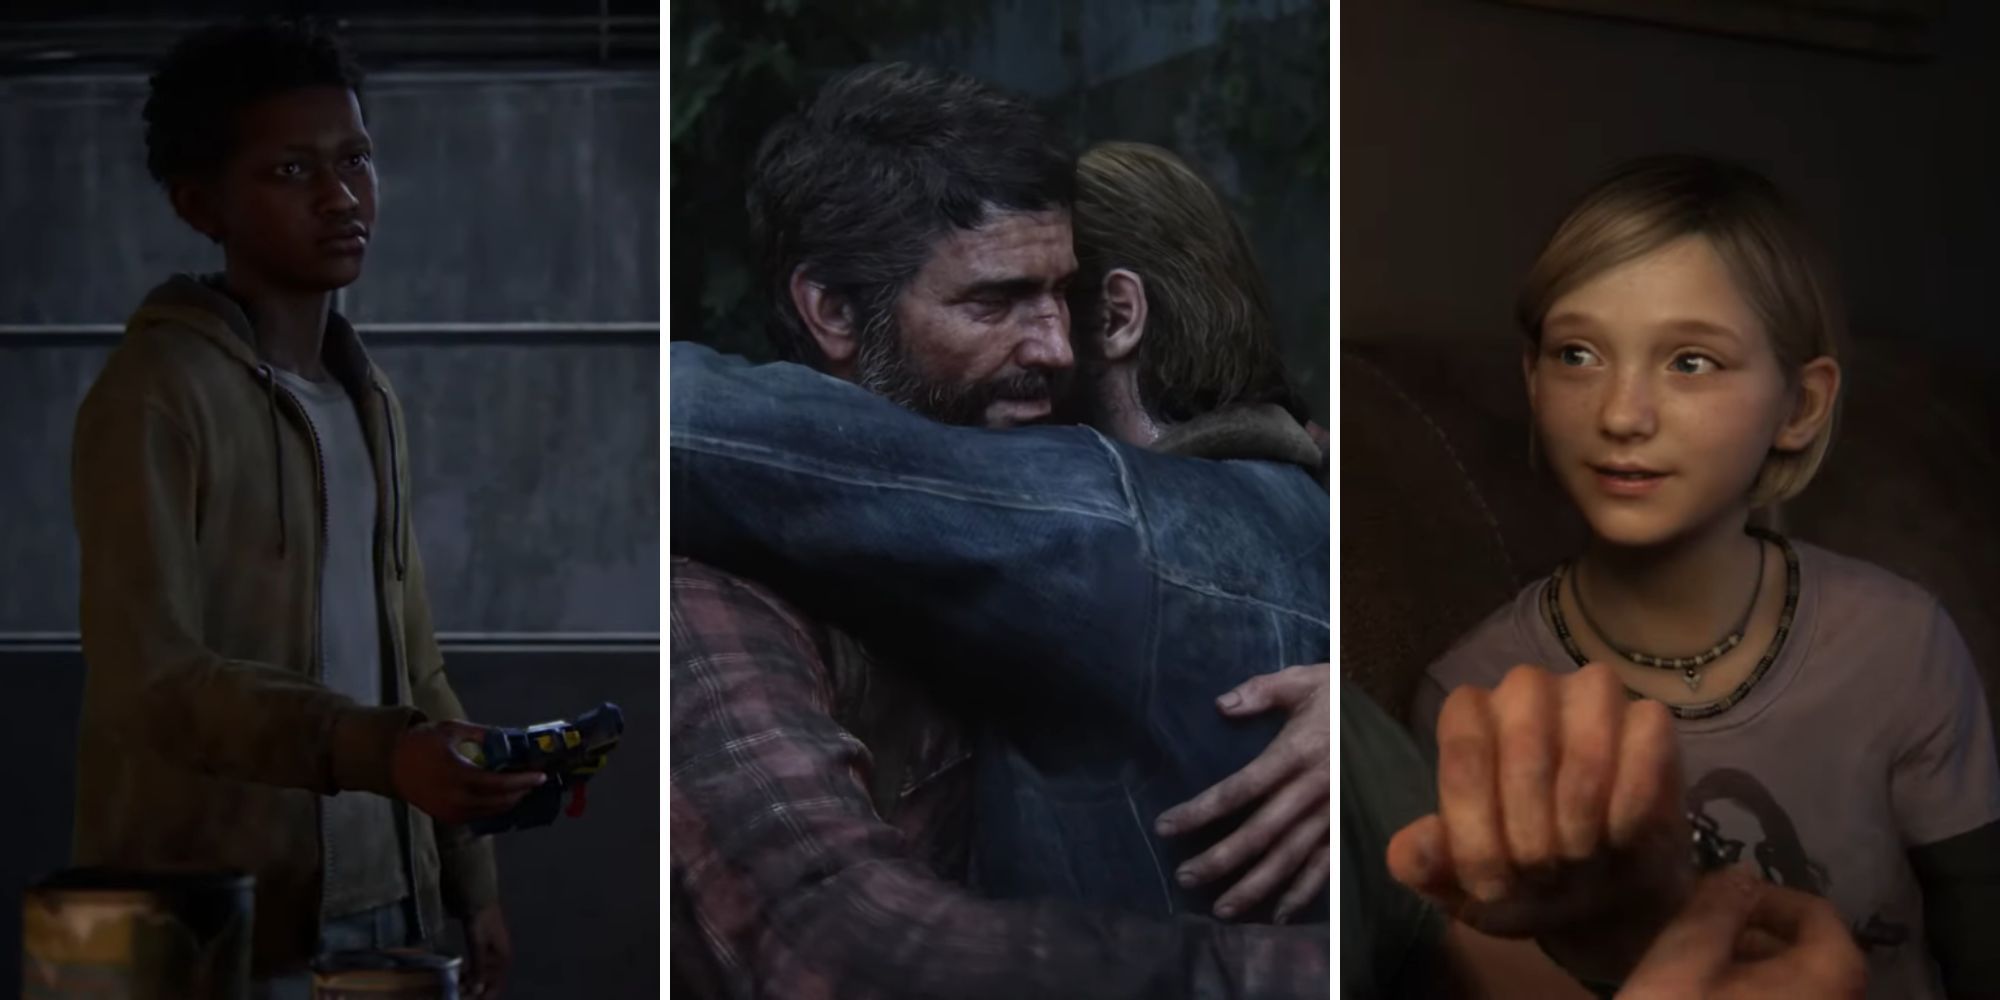 Sam holds a toy by a window in the dark, Joel and Tommy hug in the rain, Sarah looks up at Joel with a smile